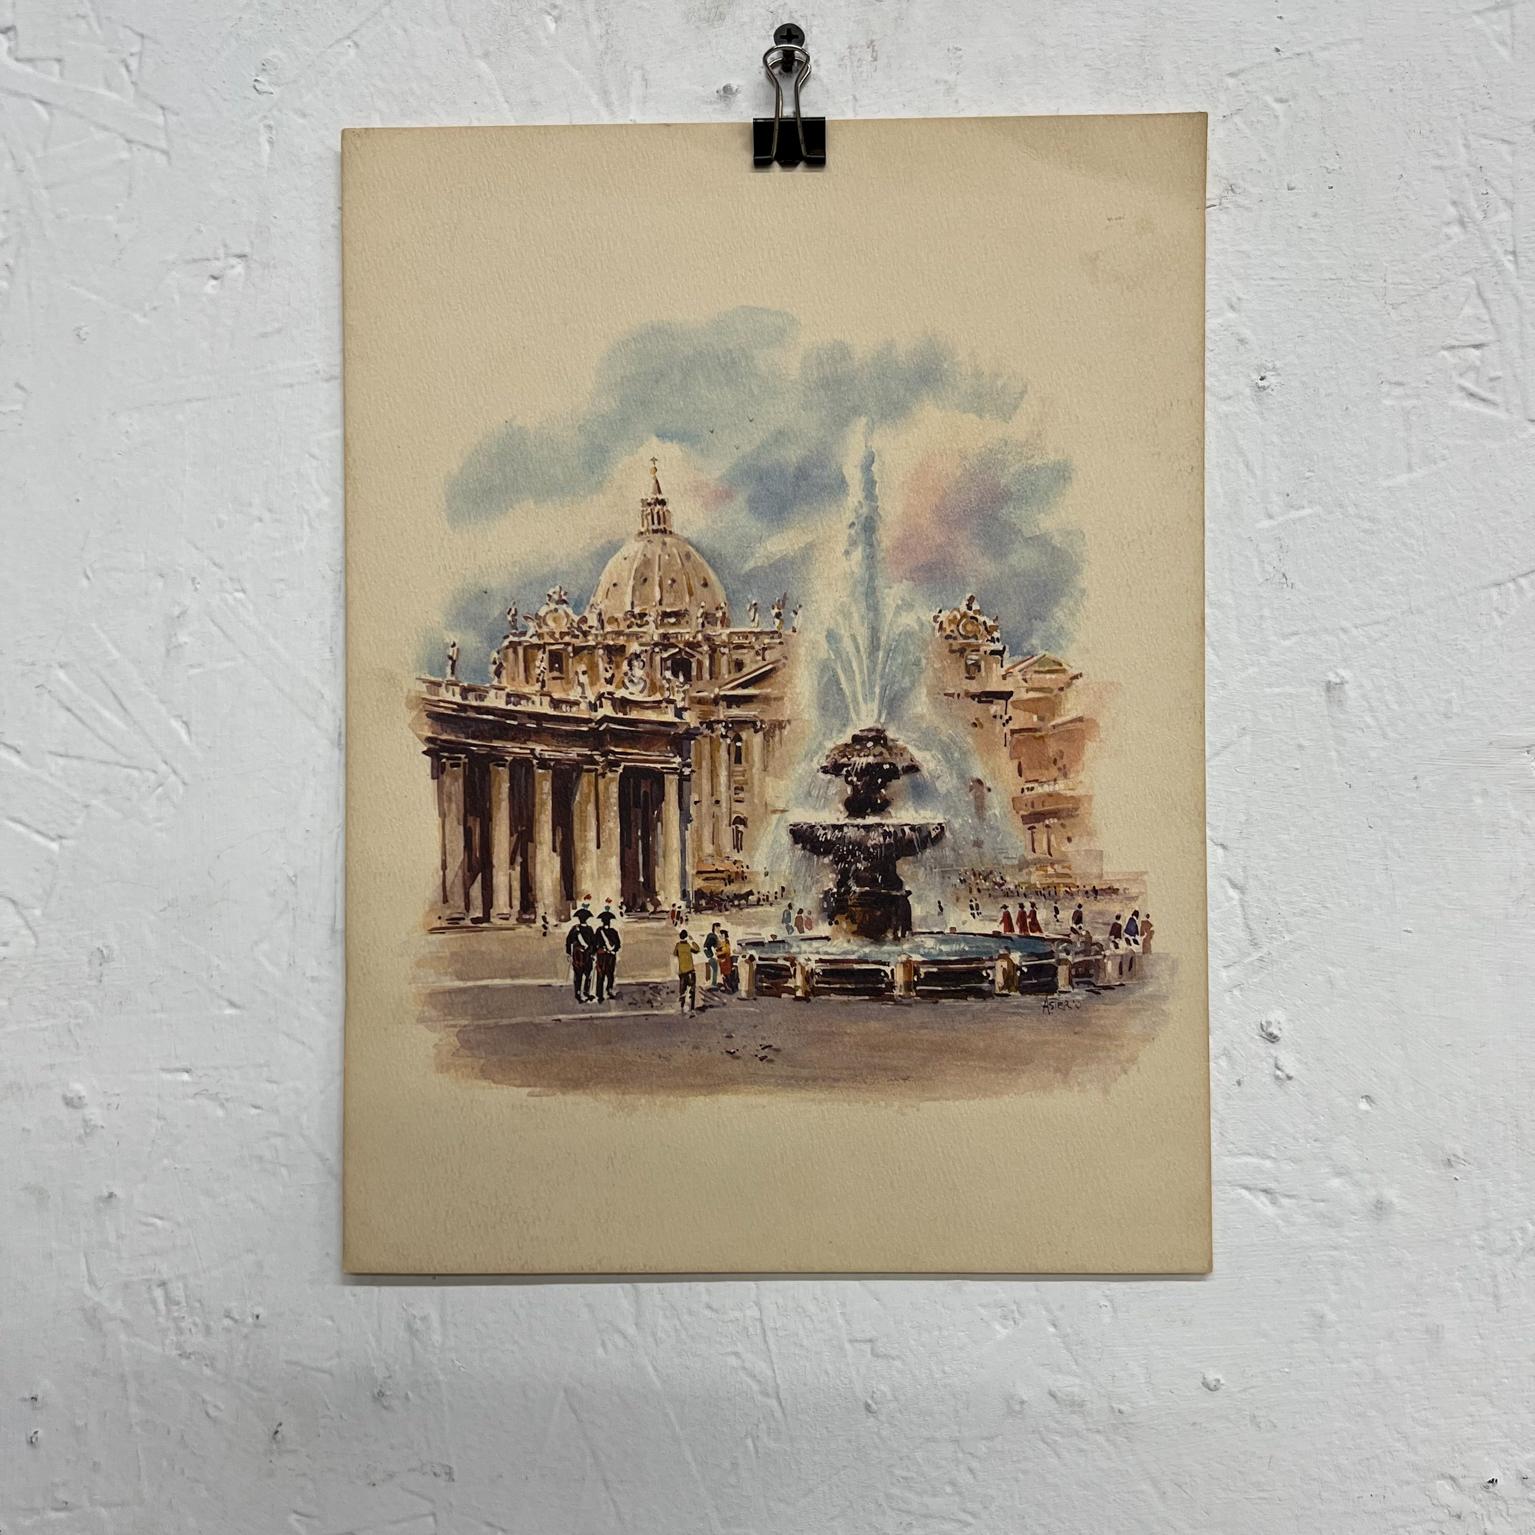 We presents,

1960s Asterio Pascolini St Peter's Basilica Rome Italy Vintage Art
Lithograph Print paper signed
European Landmark
9 x 12
Preowned unrestored original vintage art unframed.
See images.
 